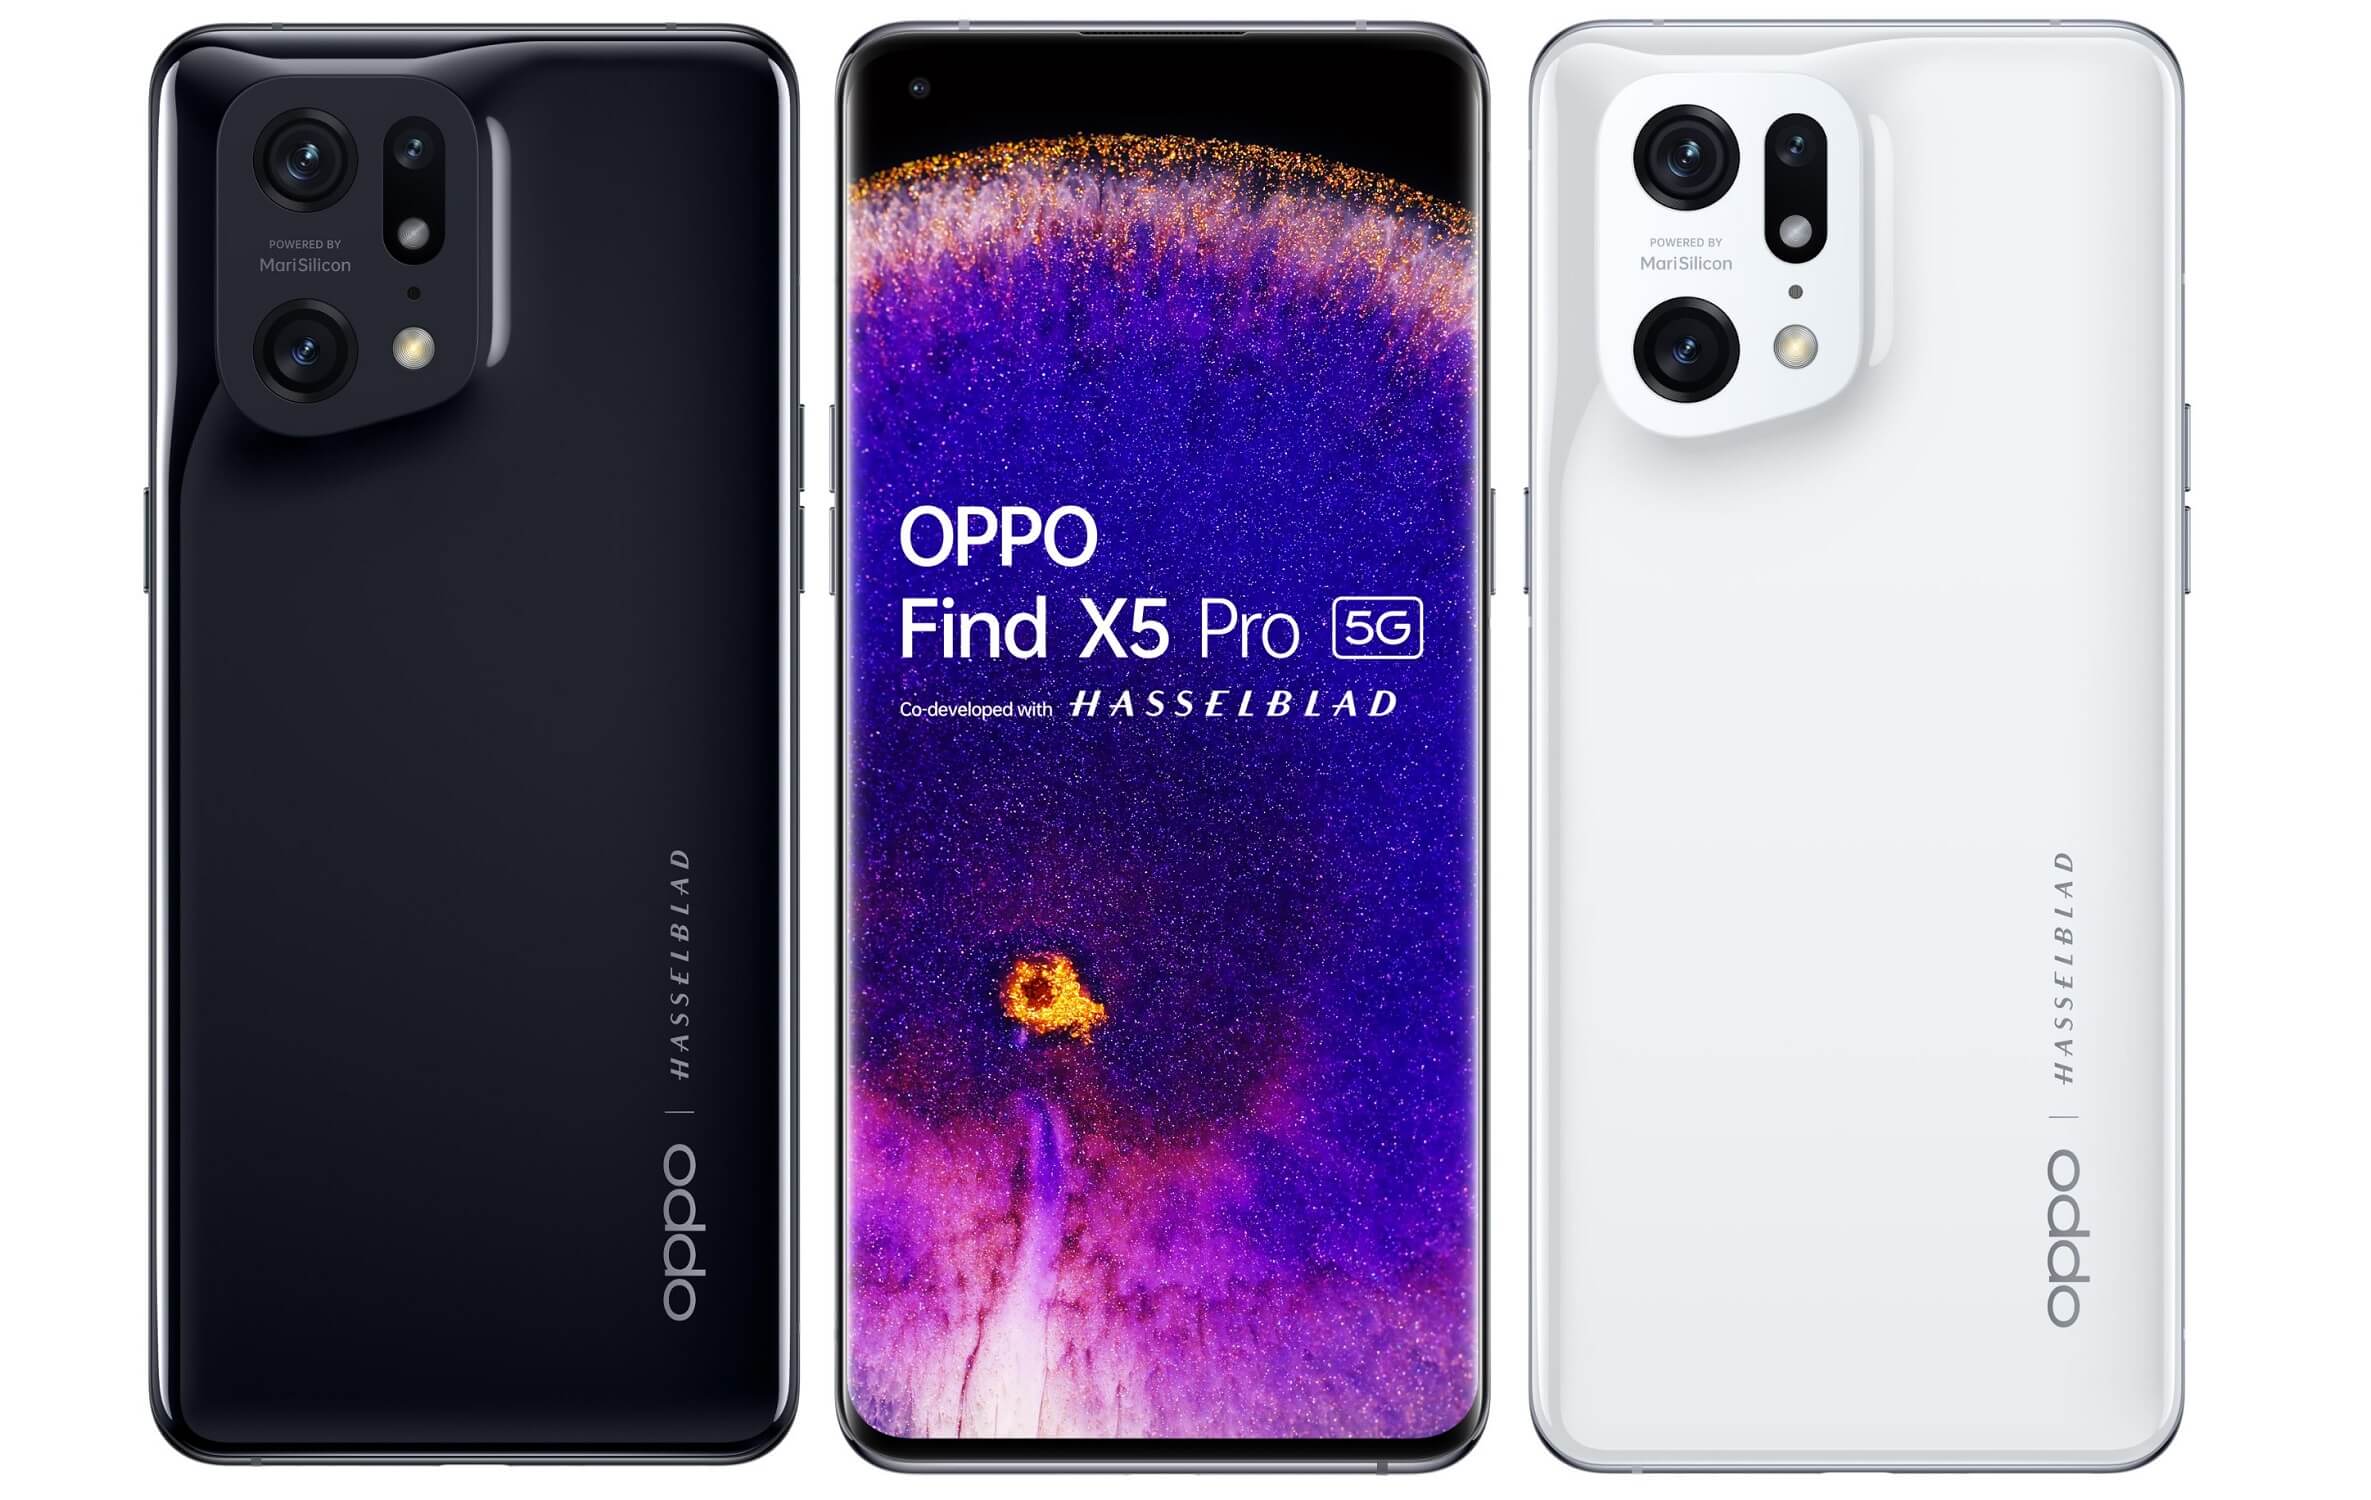 OPPO Find X5 Pro 5G colors